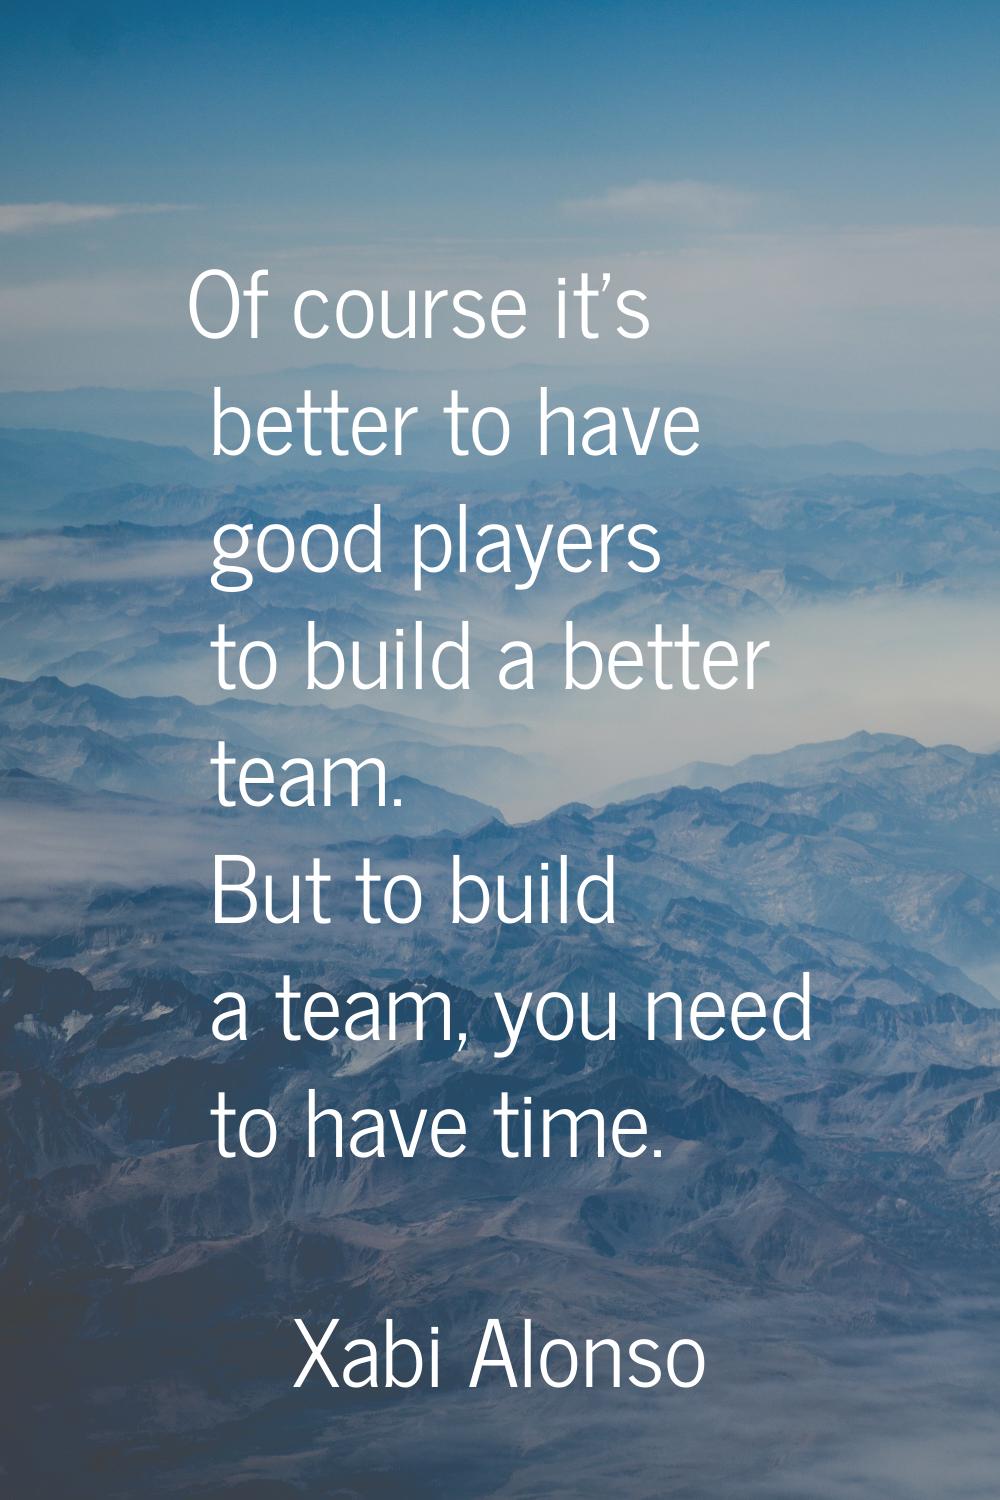 Of course it's better to have good players to build a better team. But to build a team, you need to